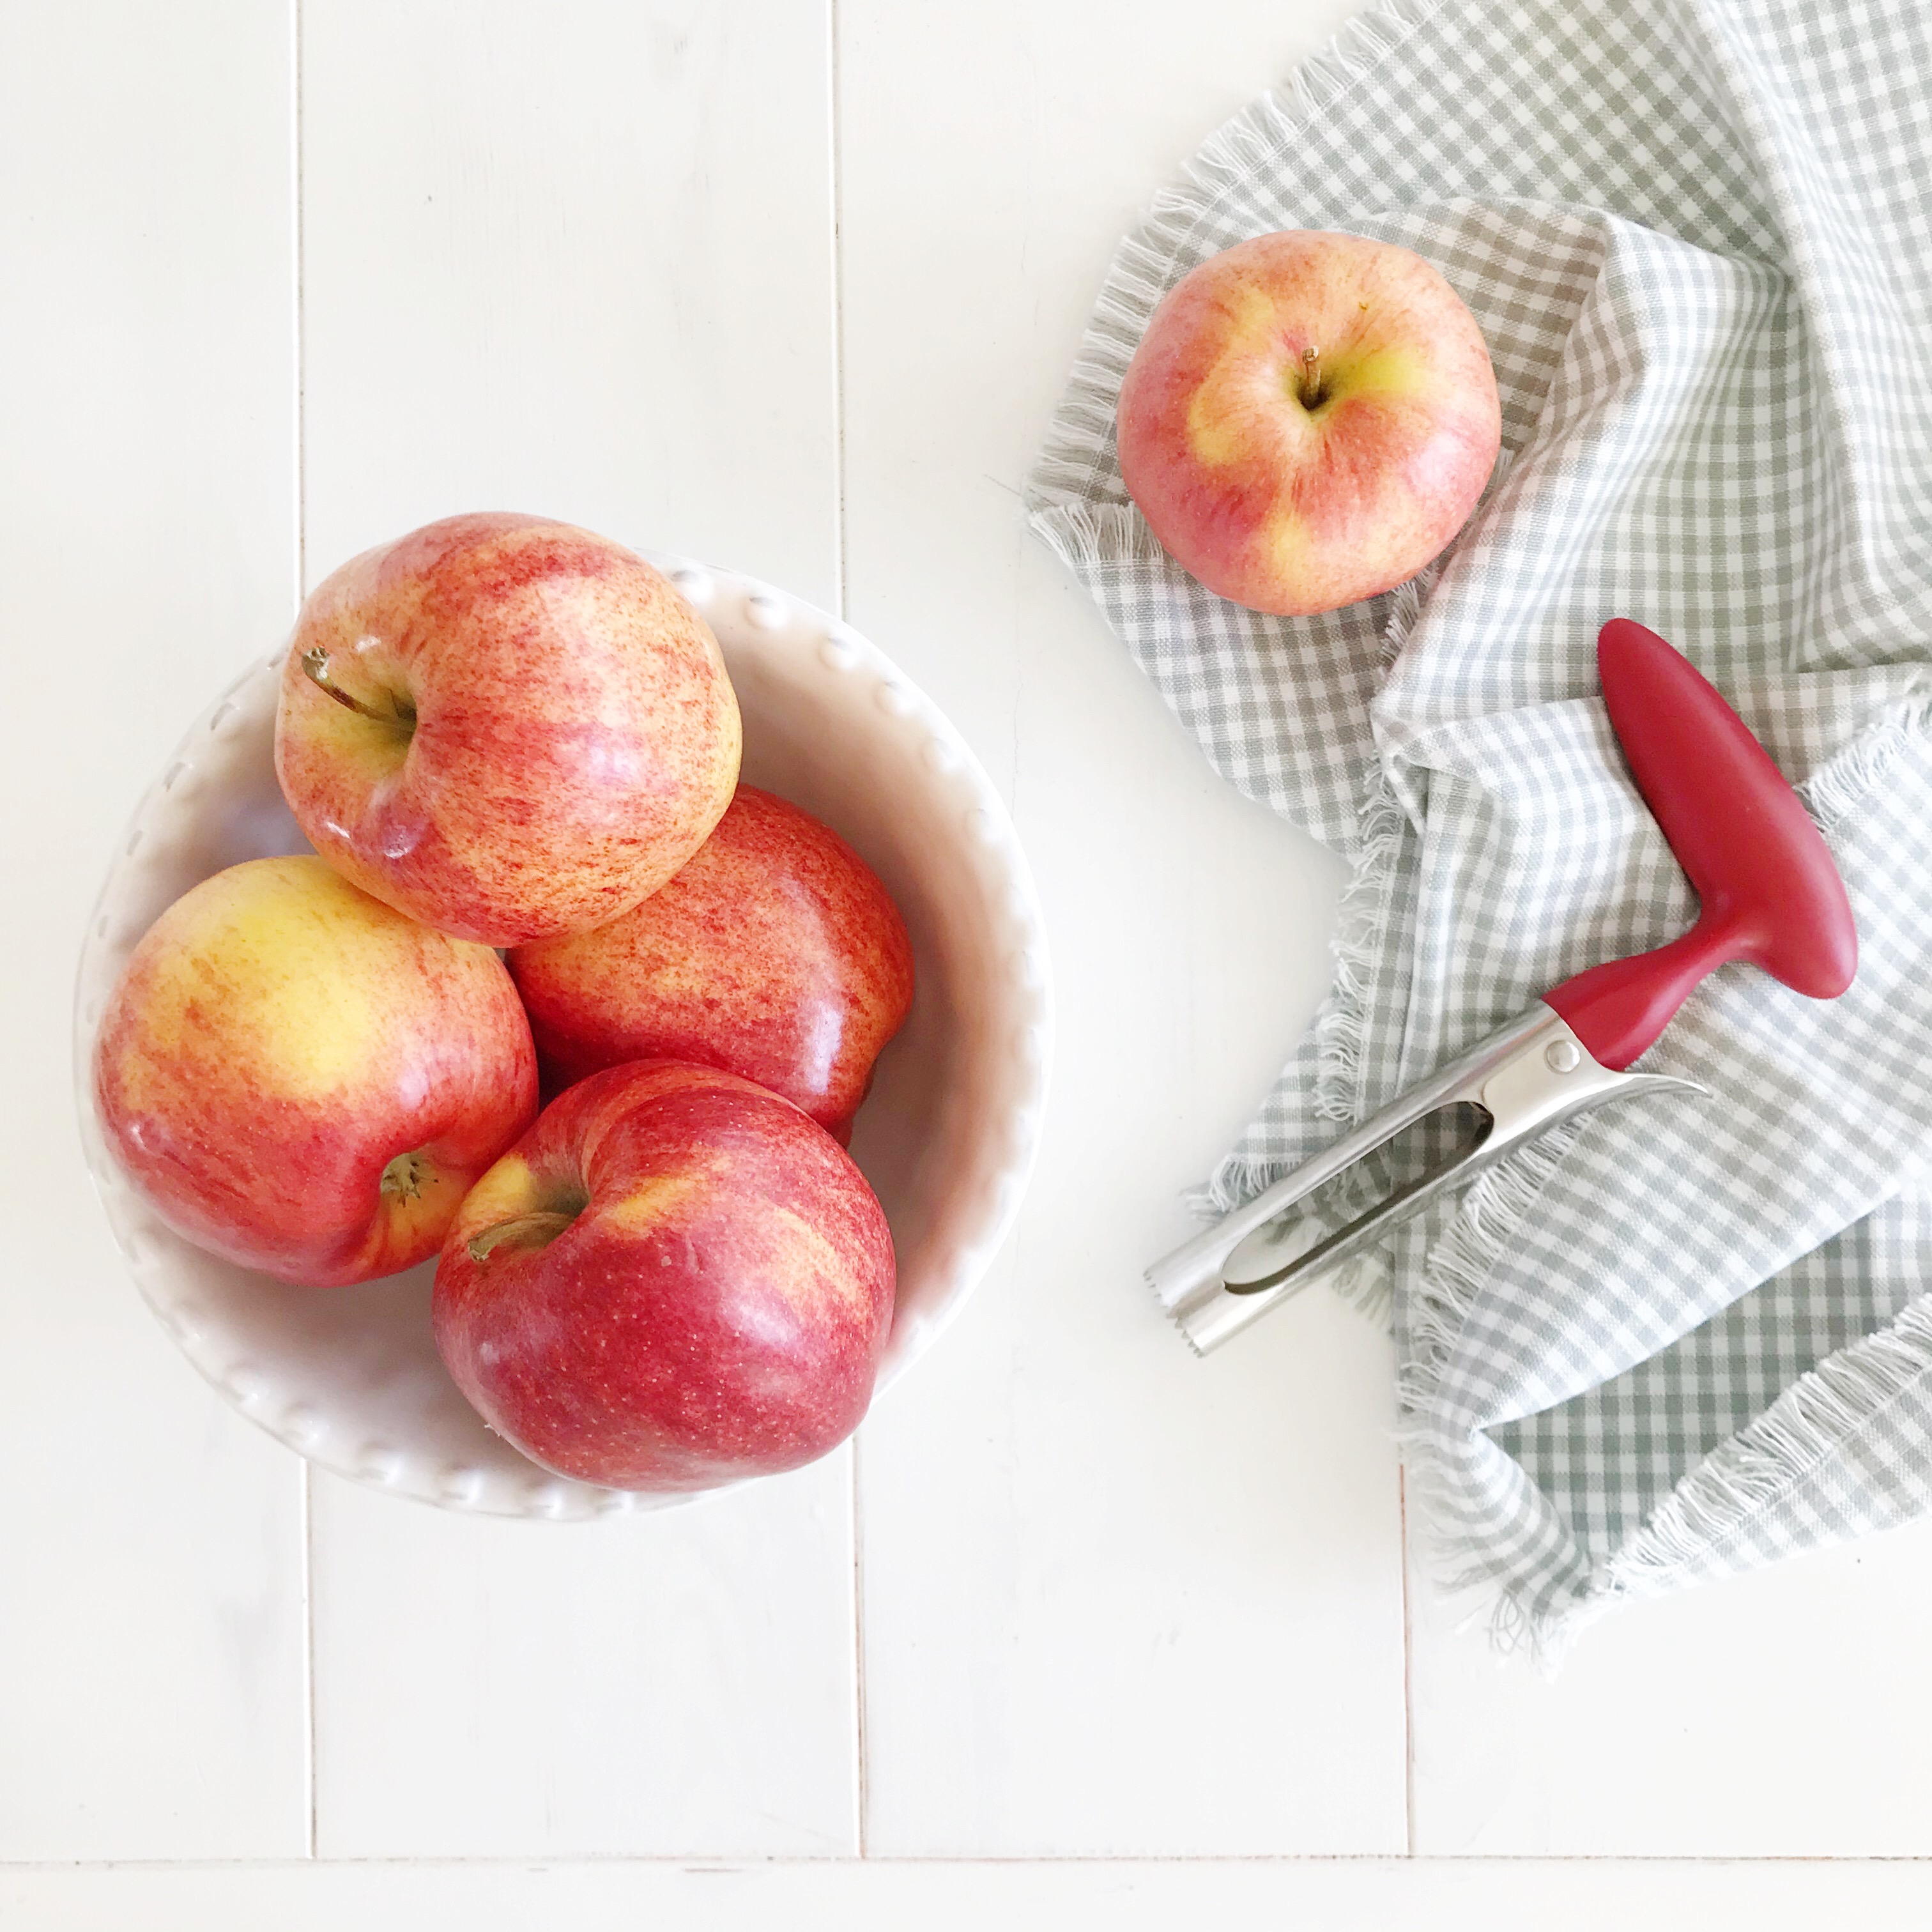 bowl of red apples with an apple corer tool